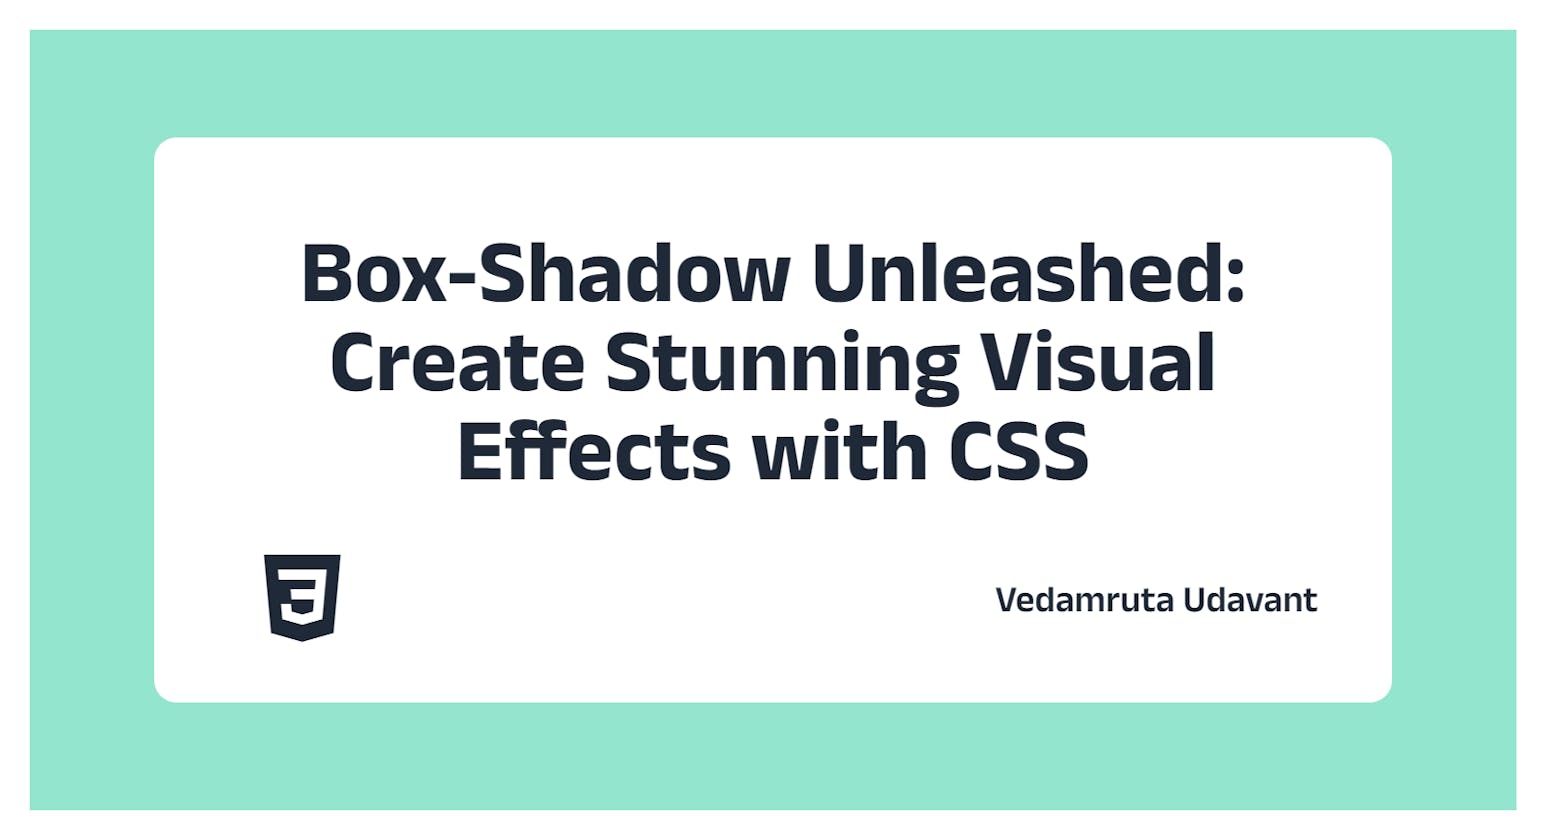 Box-Shadow Unleashed: Create Stunning Visual Effects with CSS